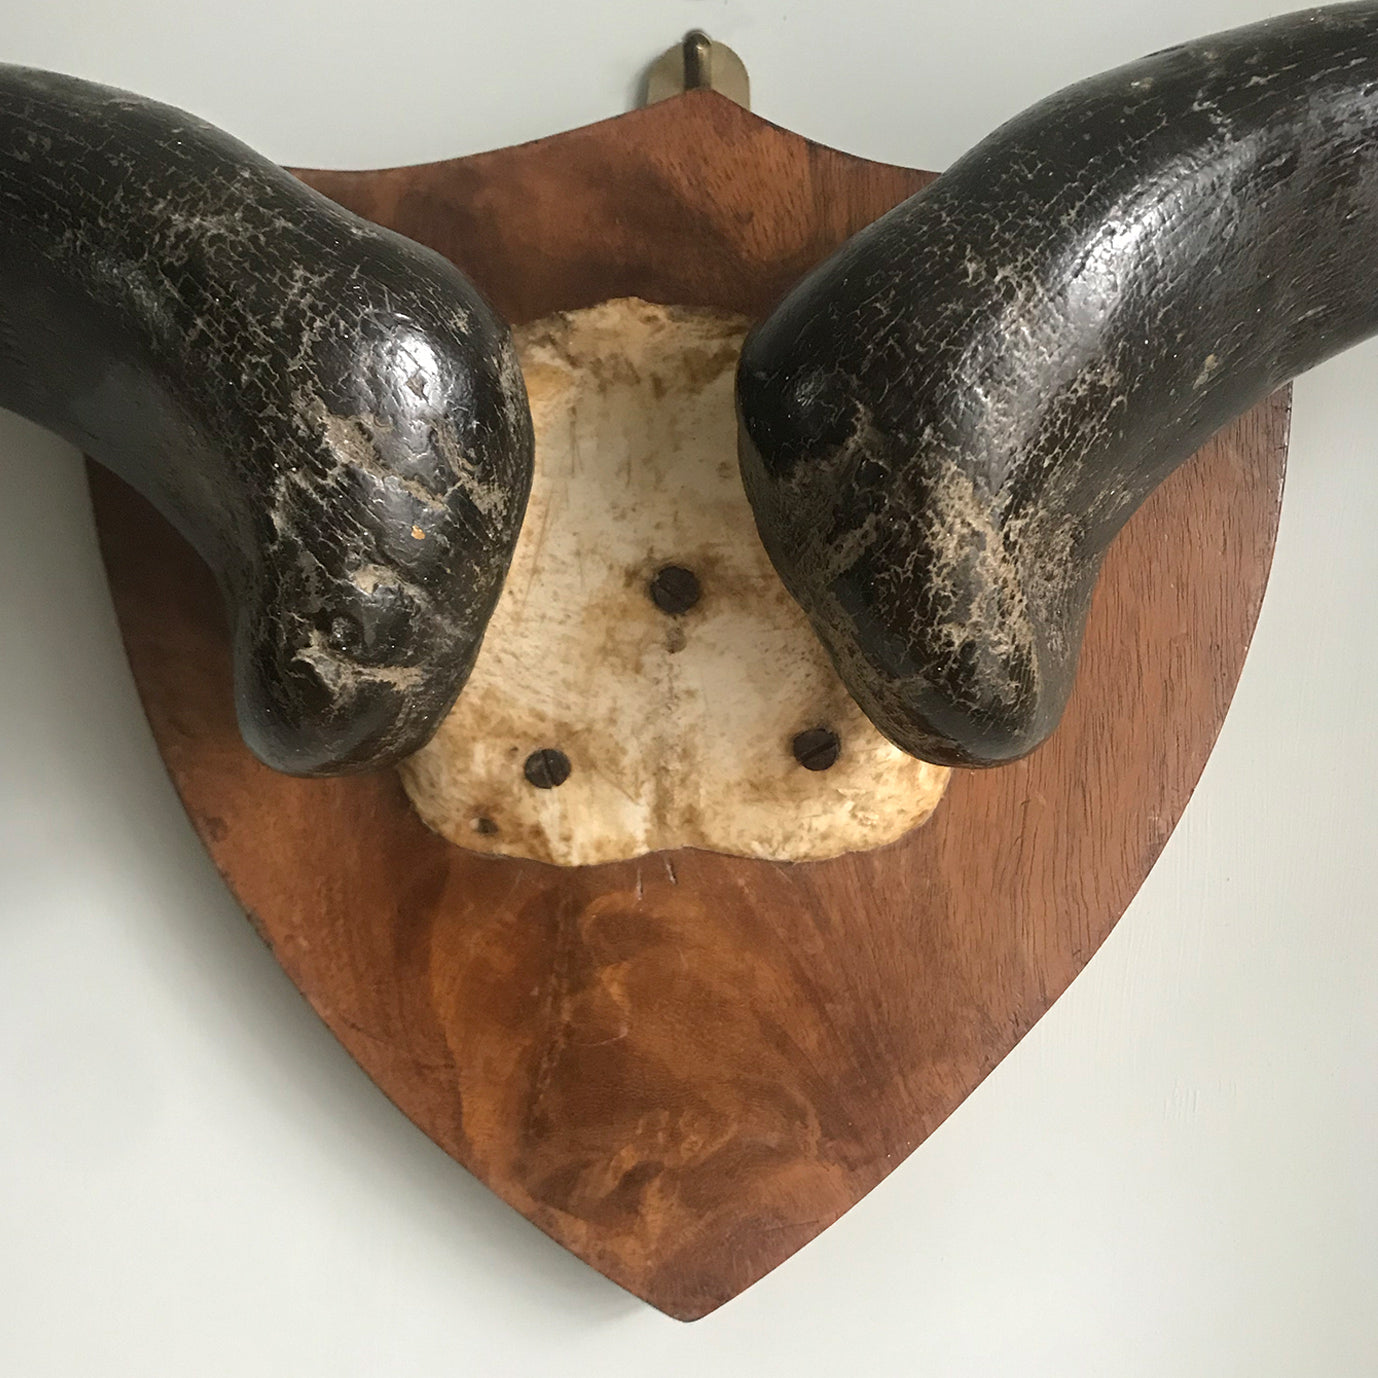 Good sized Antique Horns mounted on a thick heavy mahogany back shield - SHOP NOW - www.intovintage.co.uk